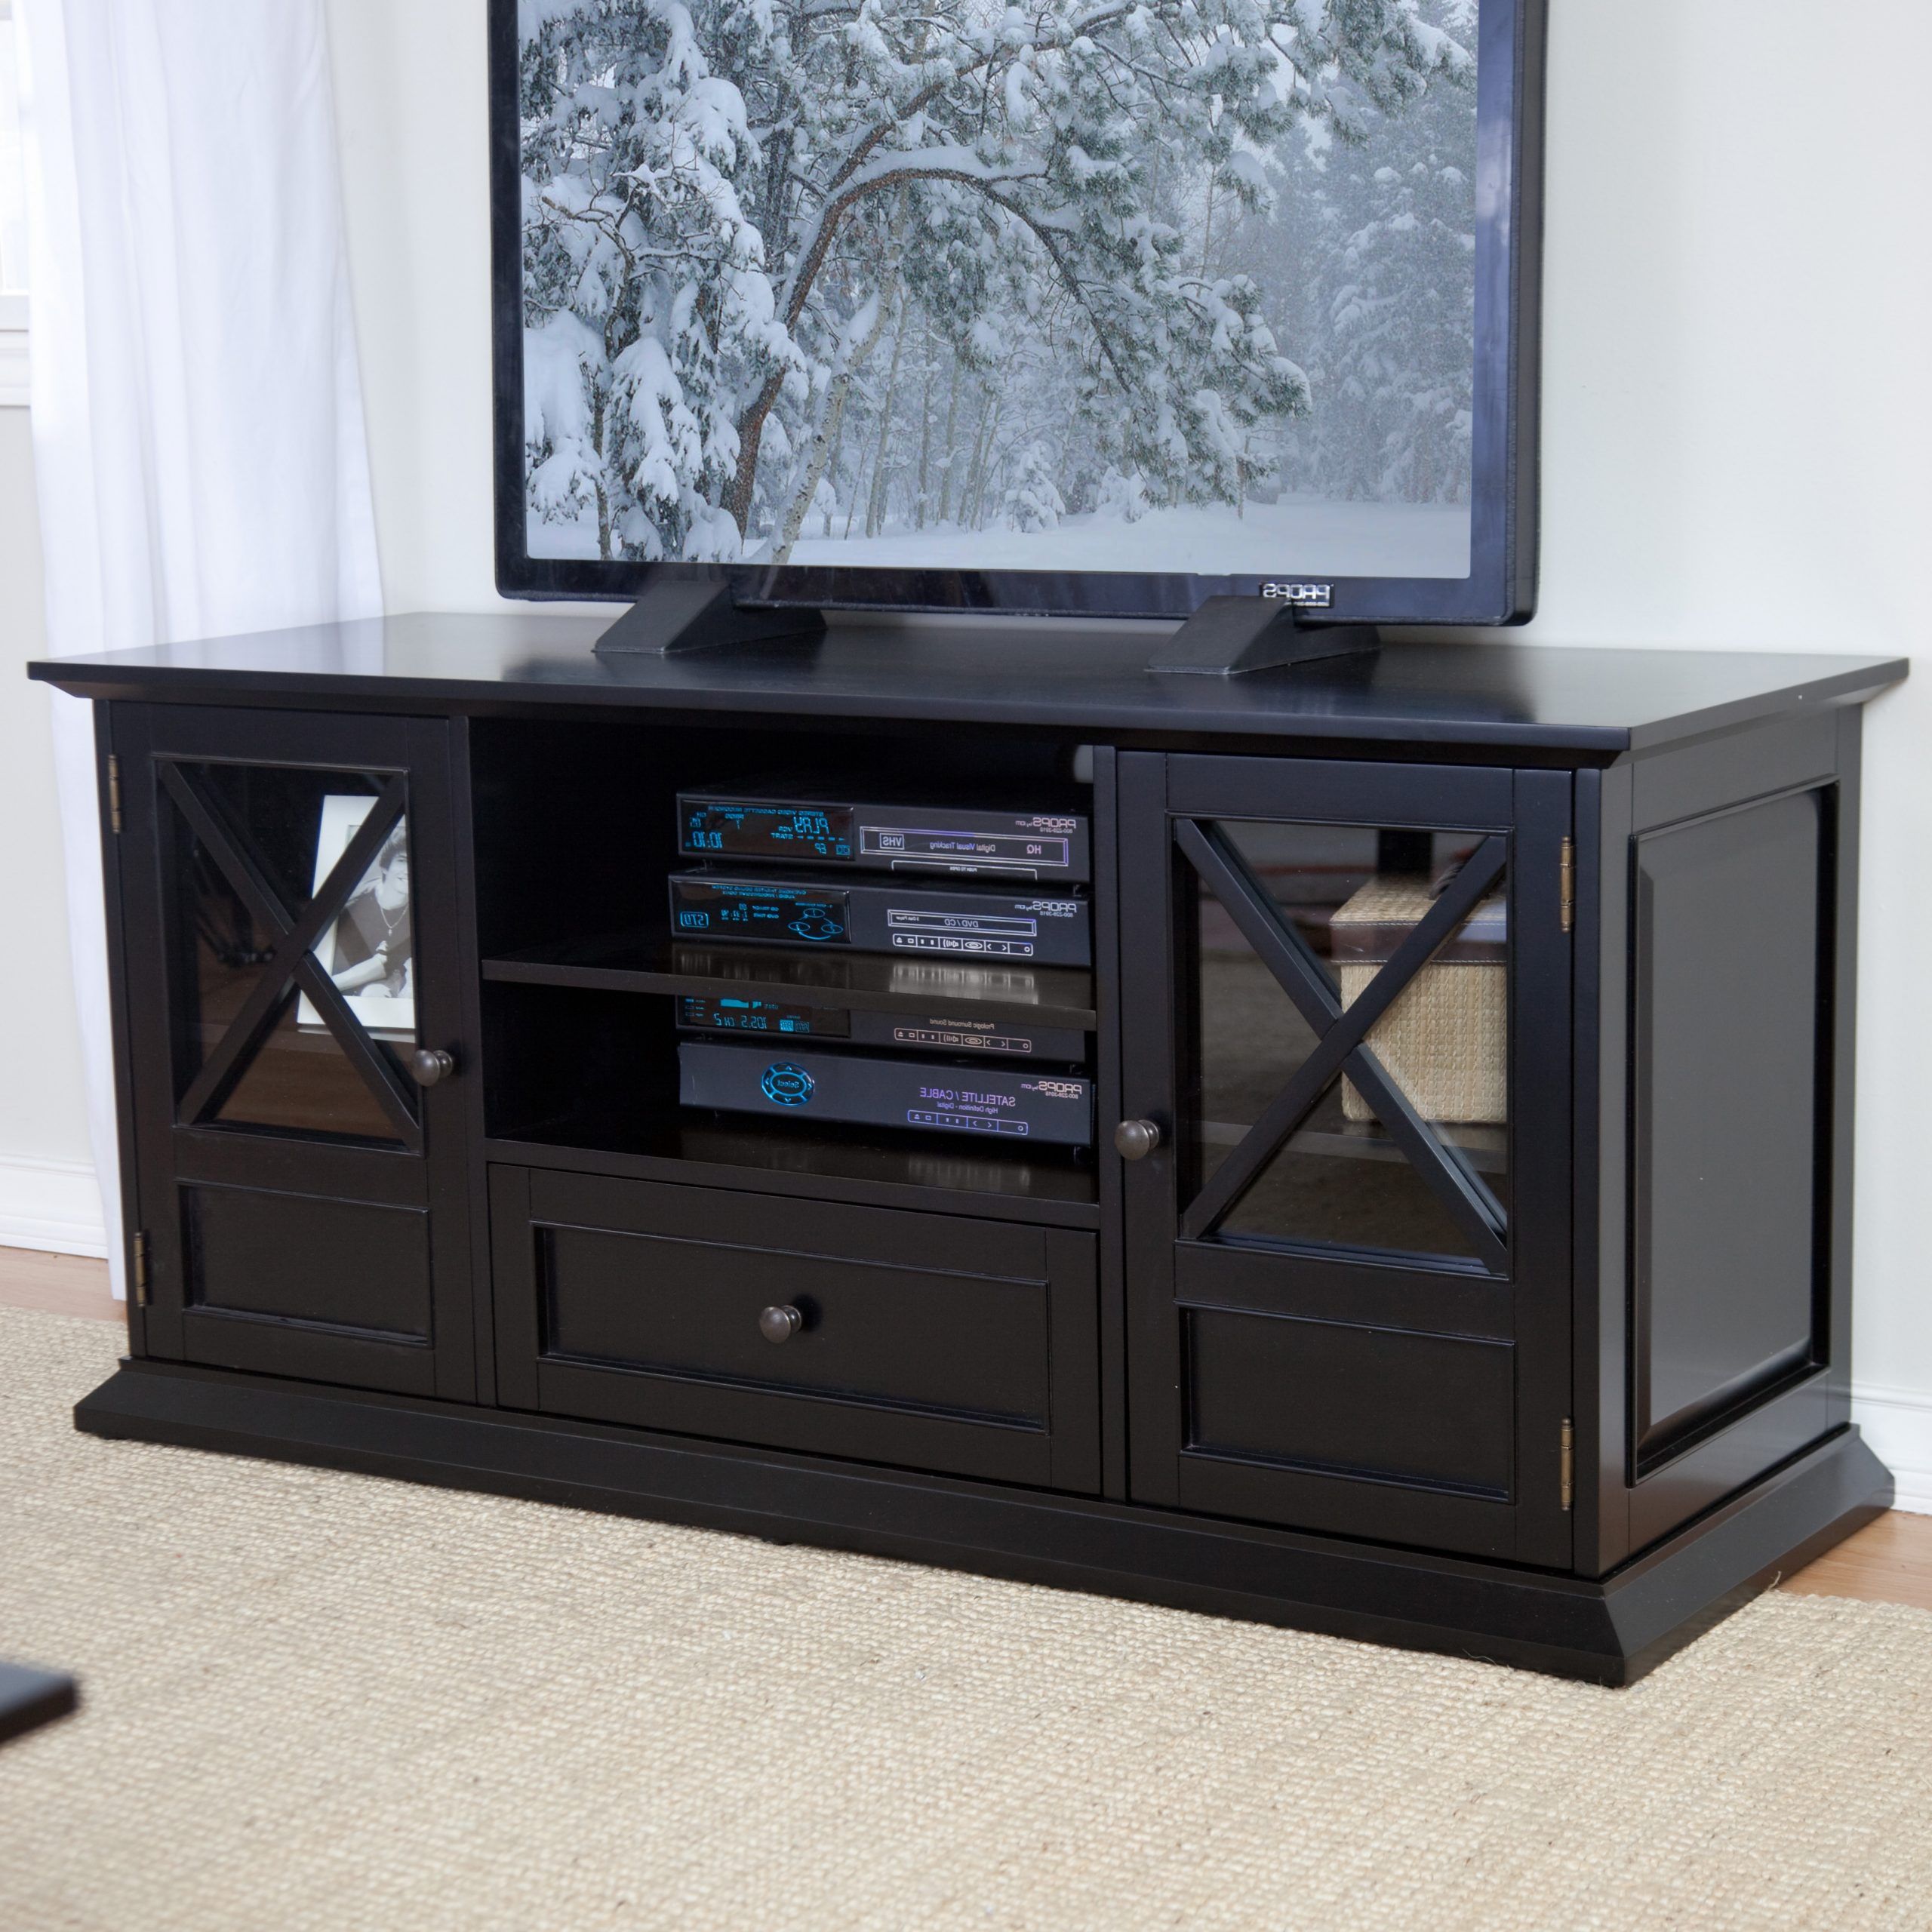 Belham Living Hampton 55 Inch Tv Stand – Black At Hayneedle Intended For Greenwich Wide Tv Stands (Gallery 4 of 20)